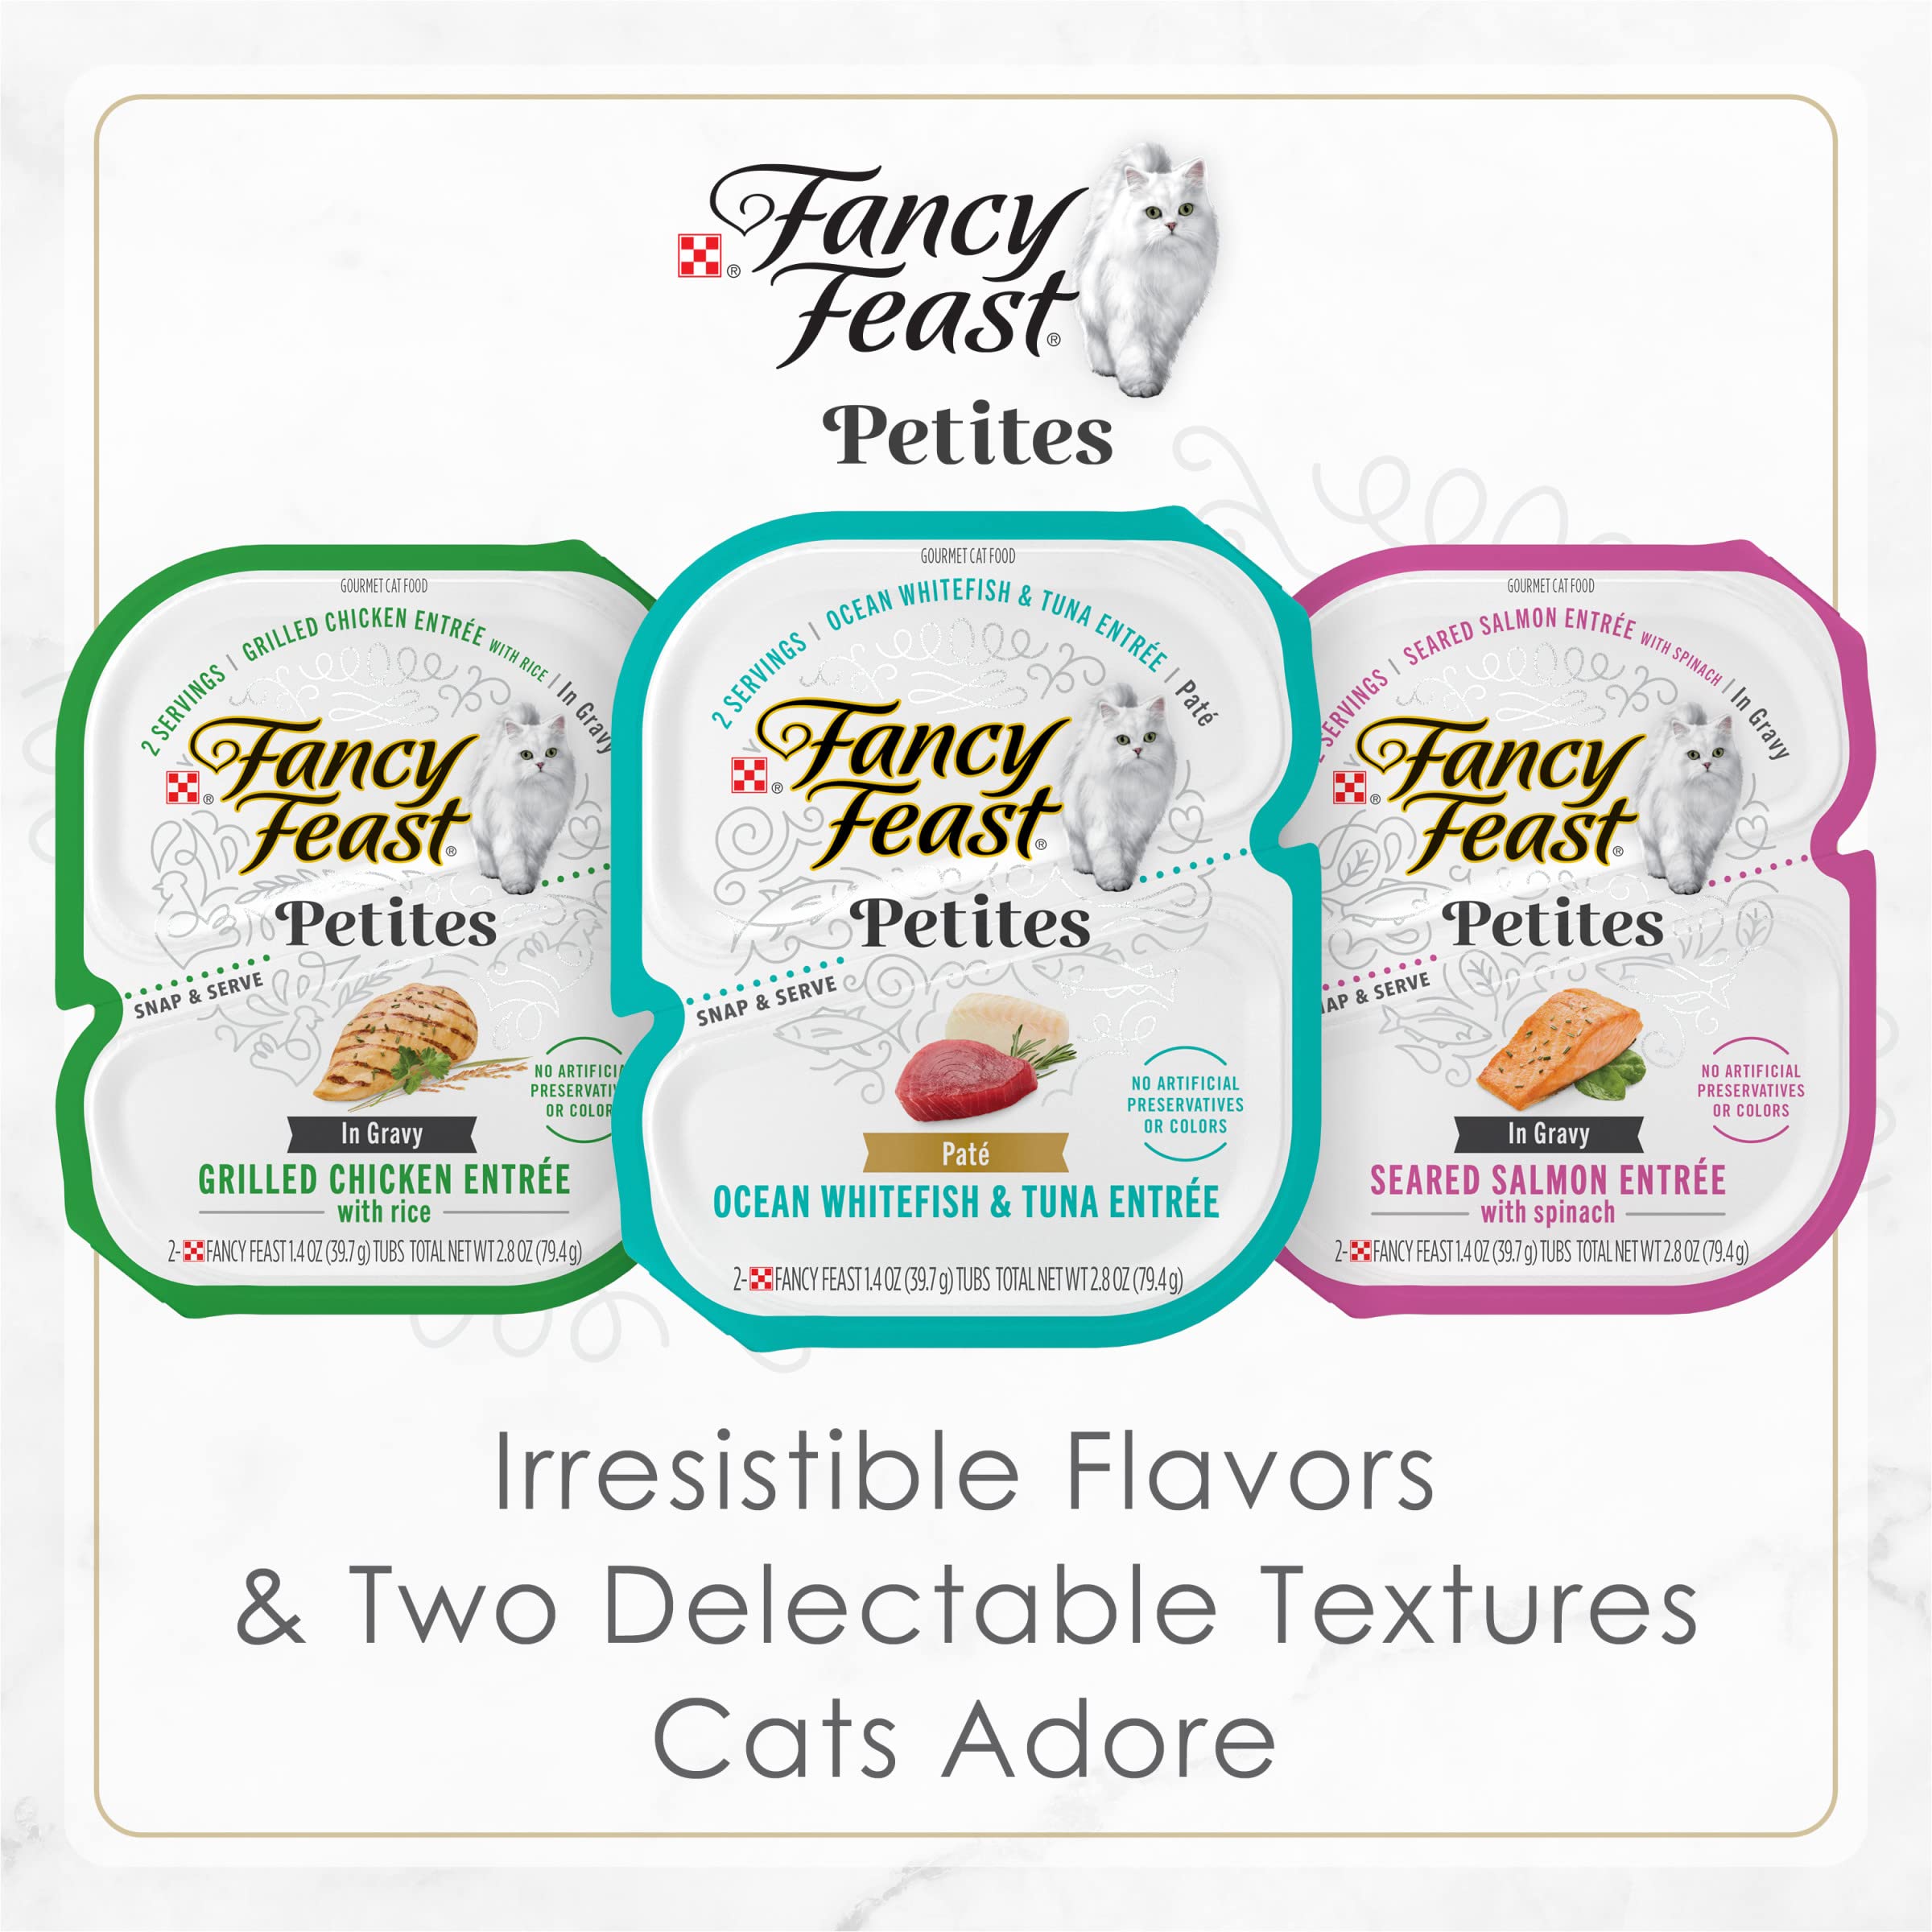 Purina Fancy Feast Petites Grilled Chicken and Rice in Gravy Wet Cat Food Trays - 2.8 Oz - Case of 12  